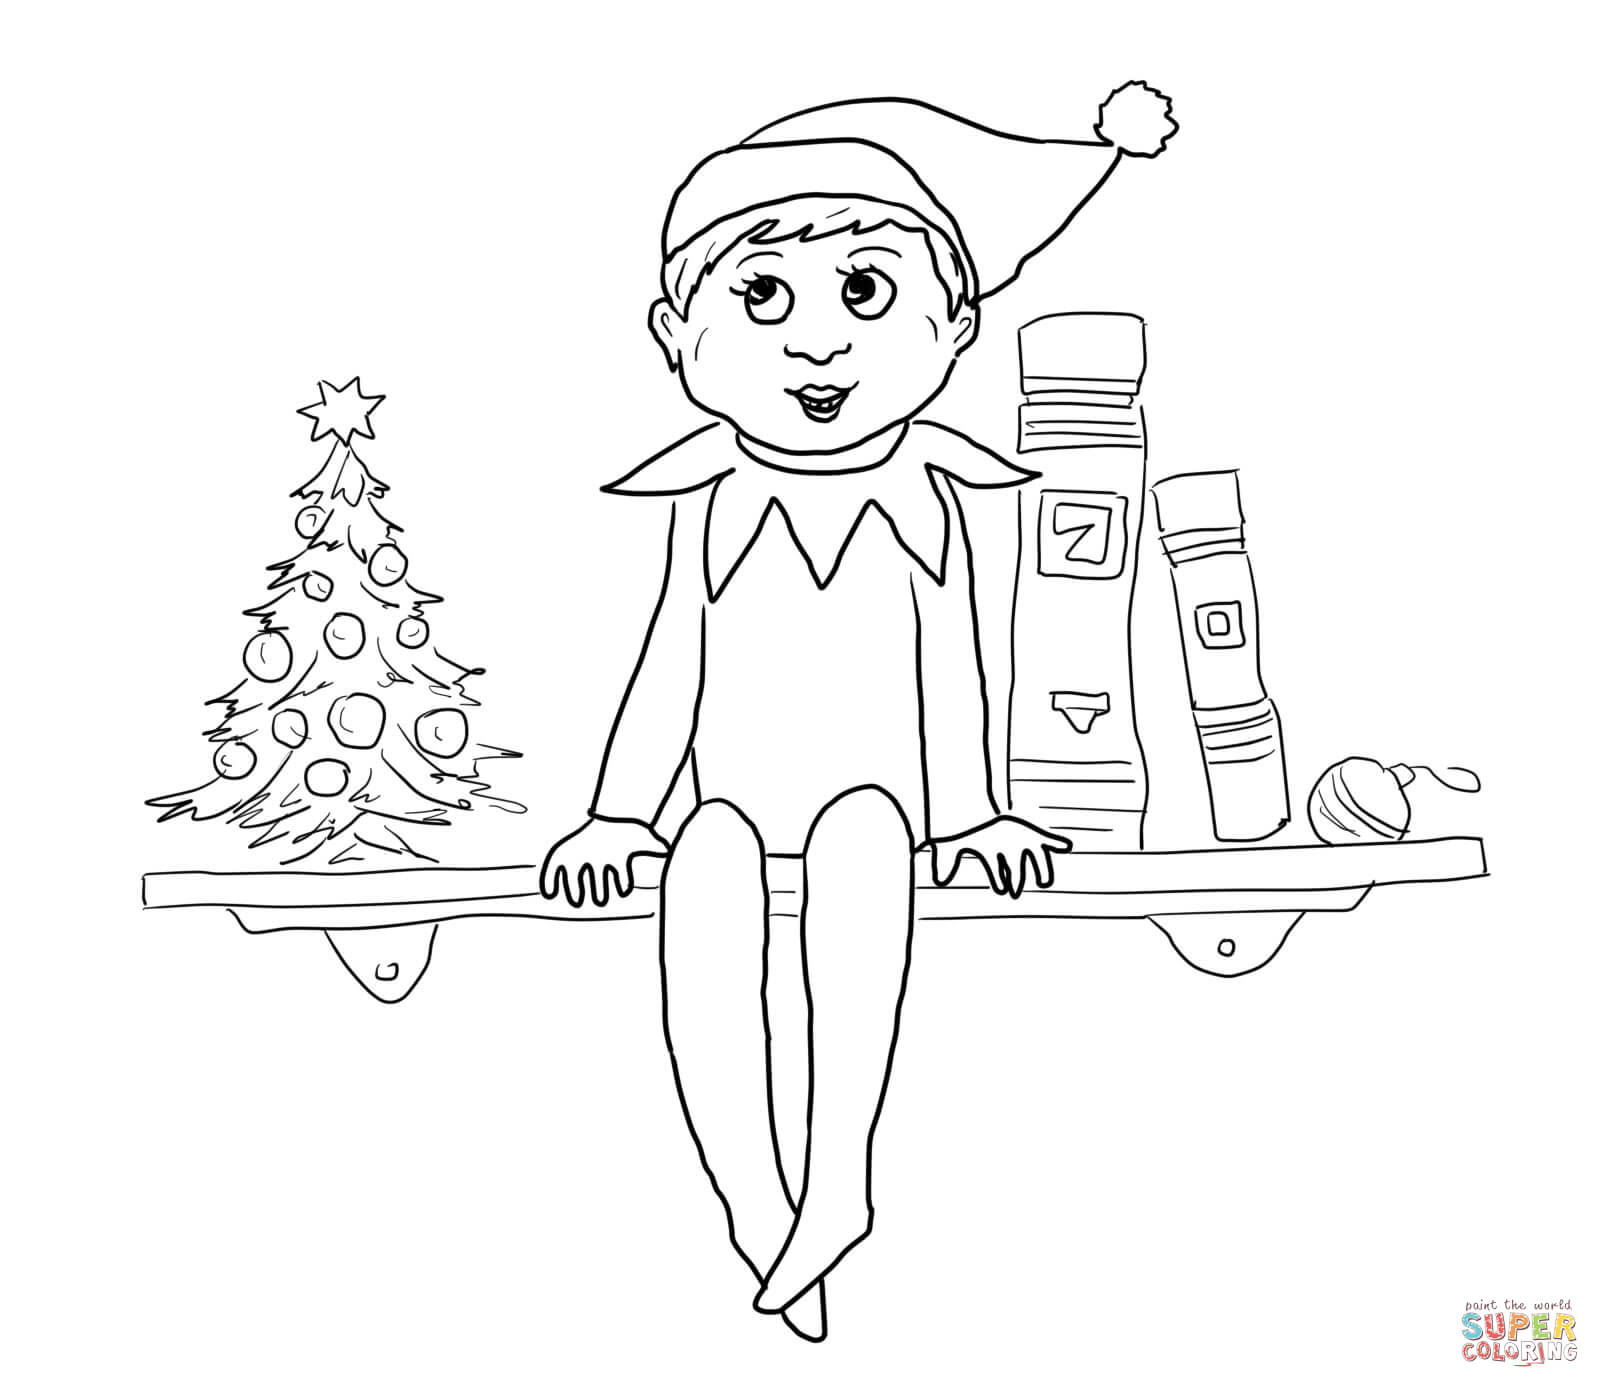 Elf on the shelf coloring pages | Free Coloring Pages